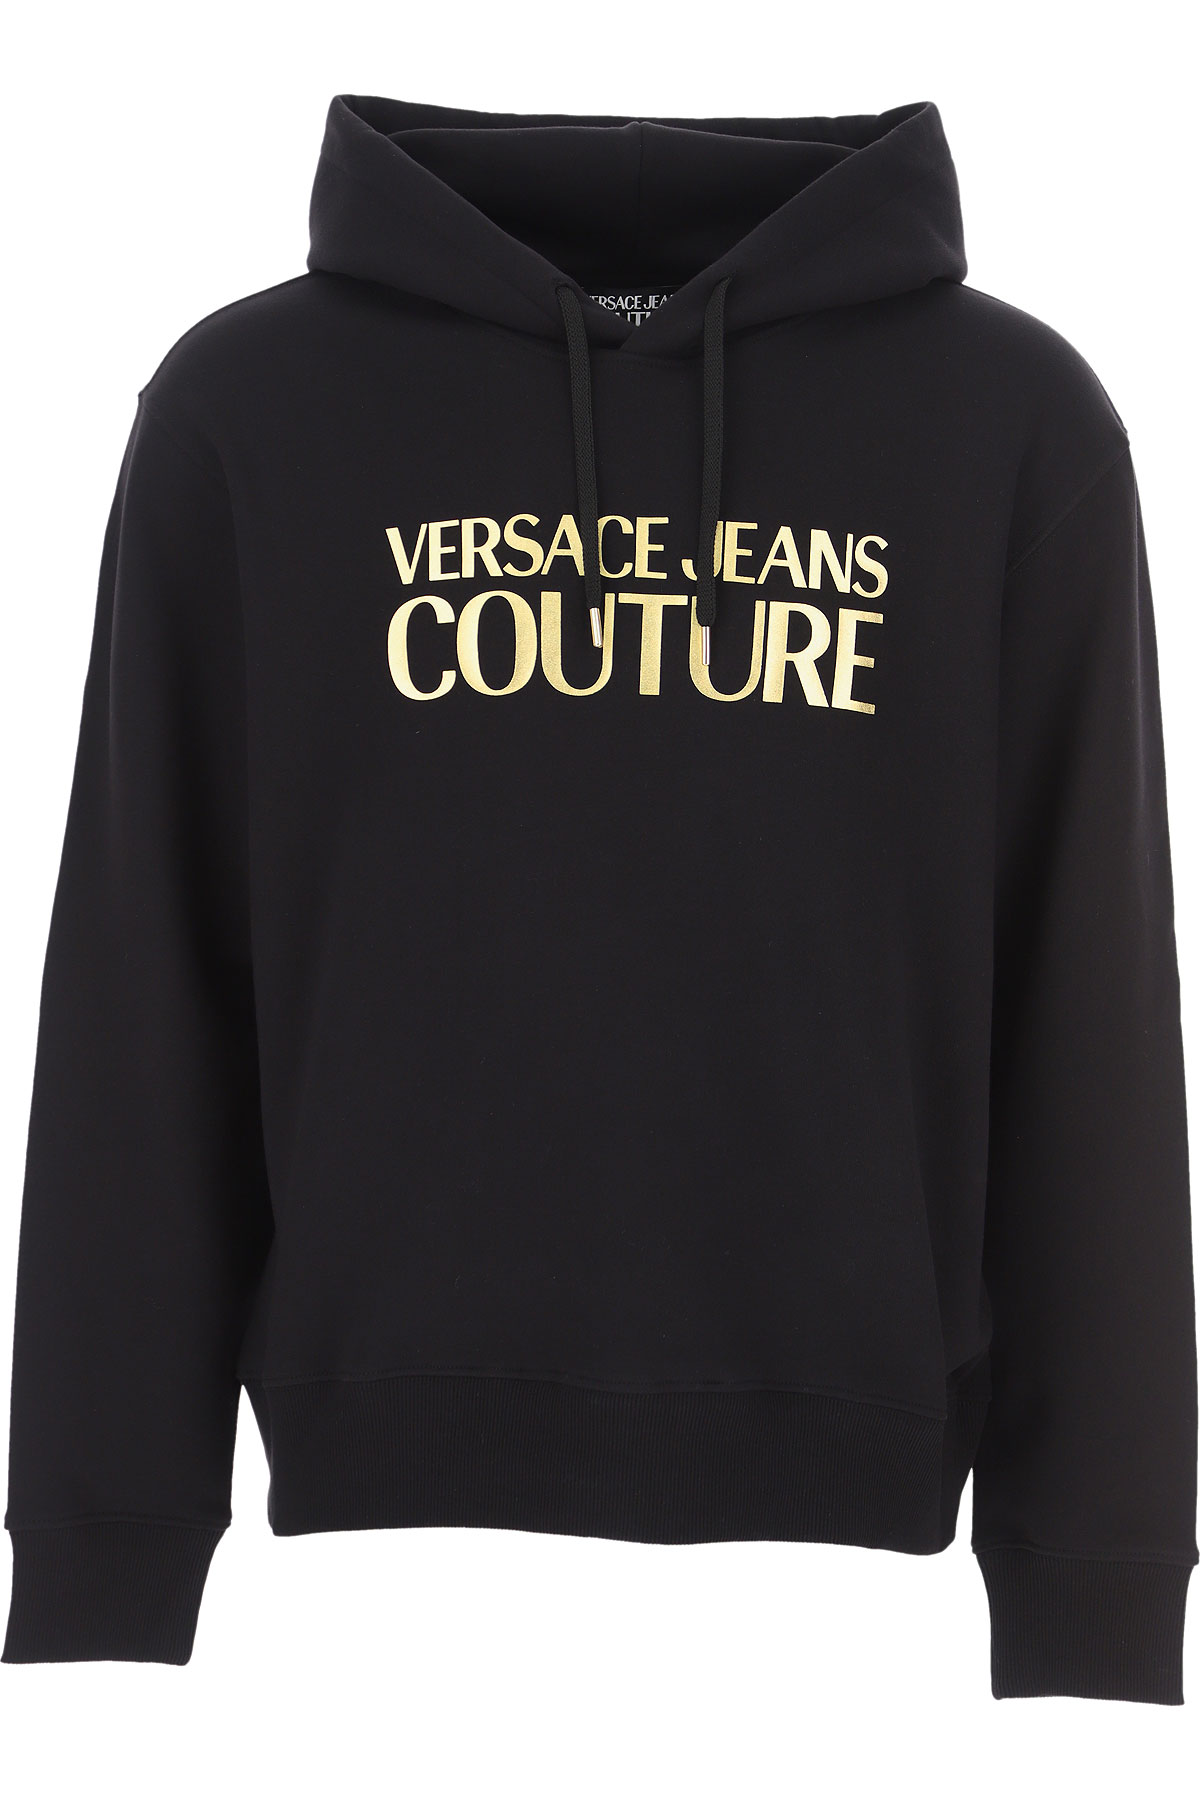 Mens Clothing Versace Jeans Couture , Style code: 72gait01-cf01t-g89